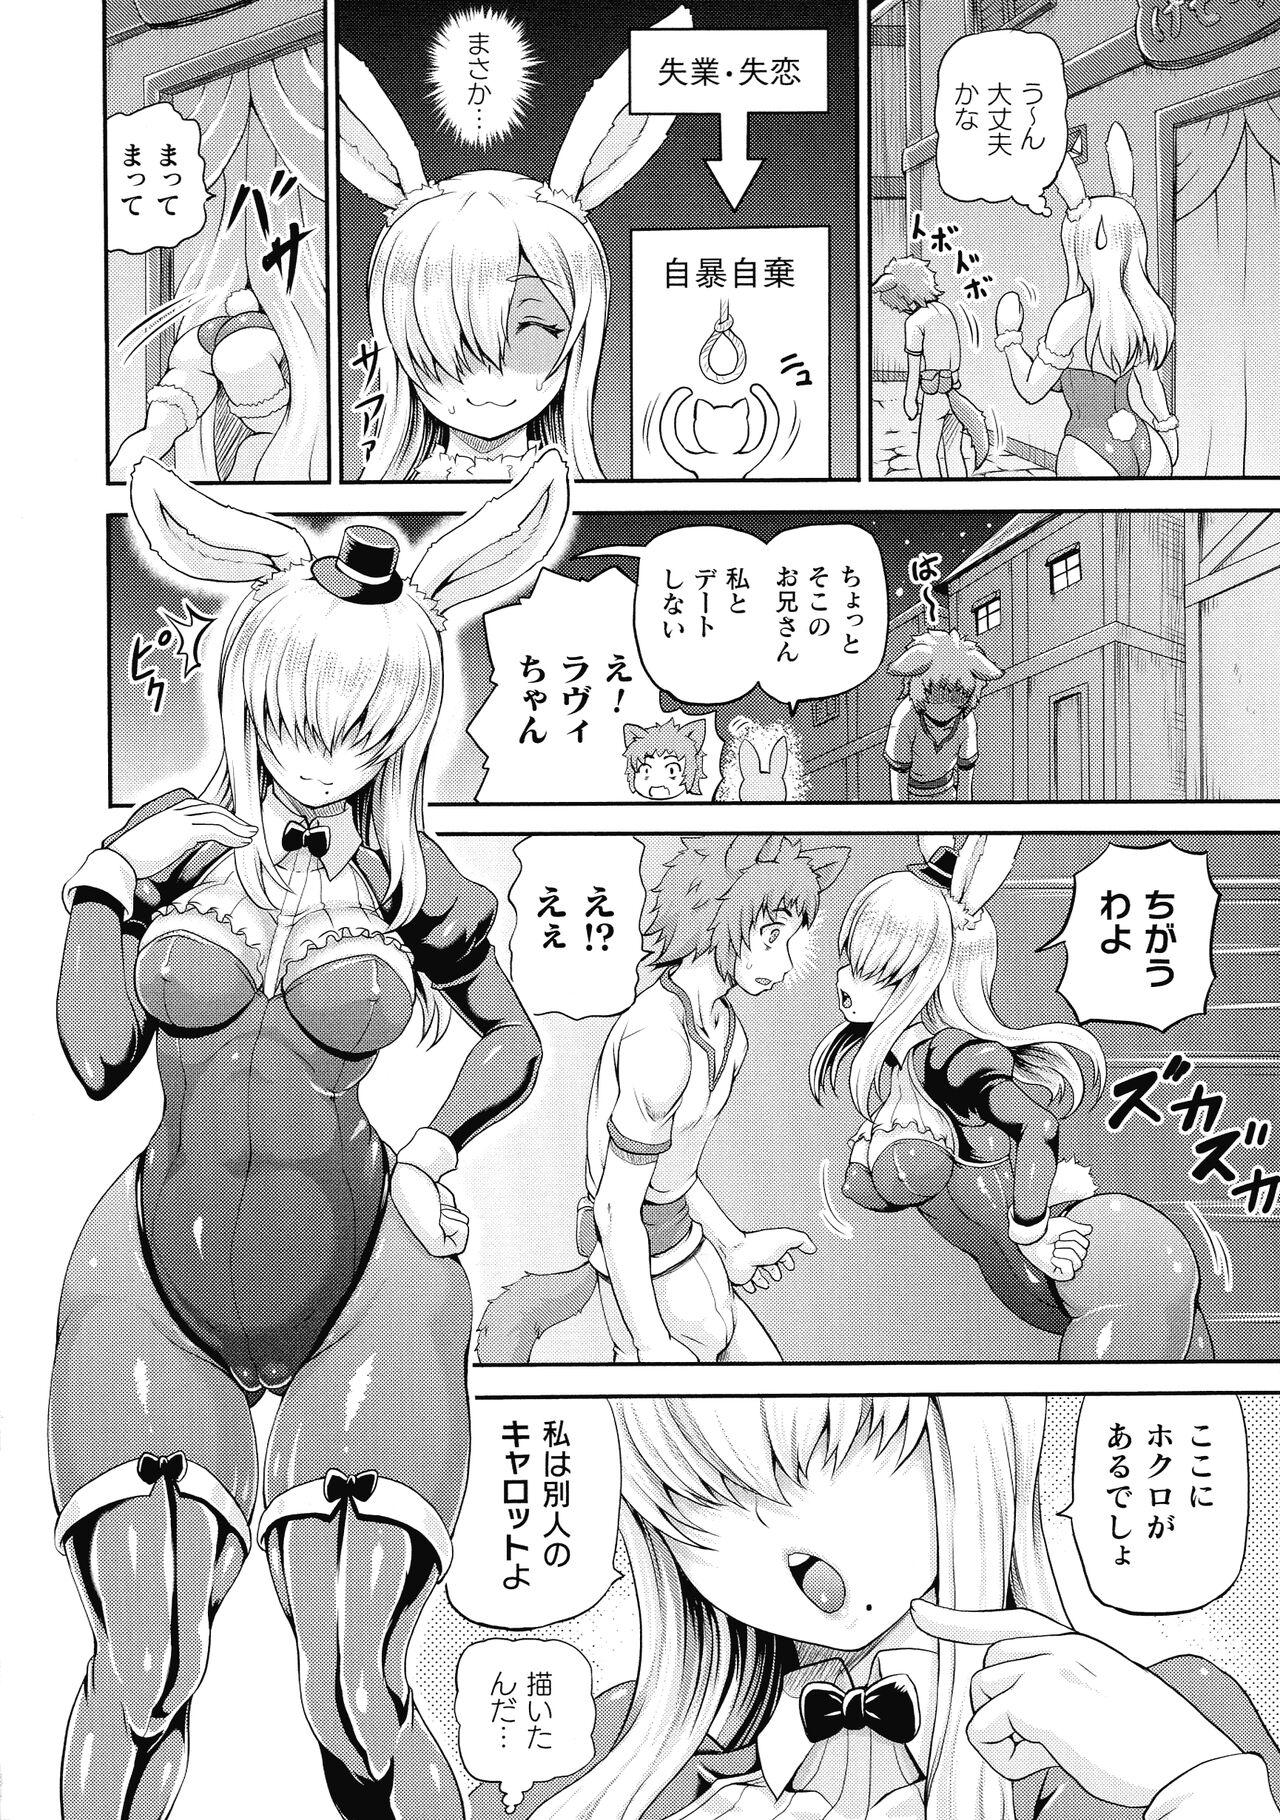 Isekai Shoukan 3 - Brothel in Another World 119